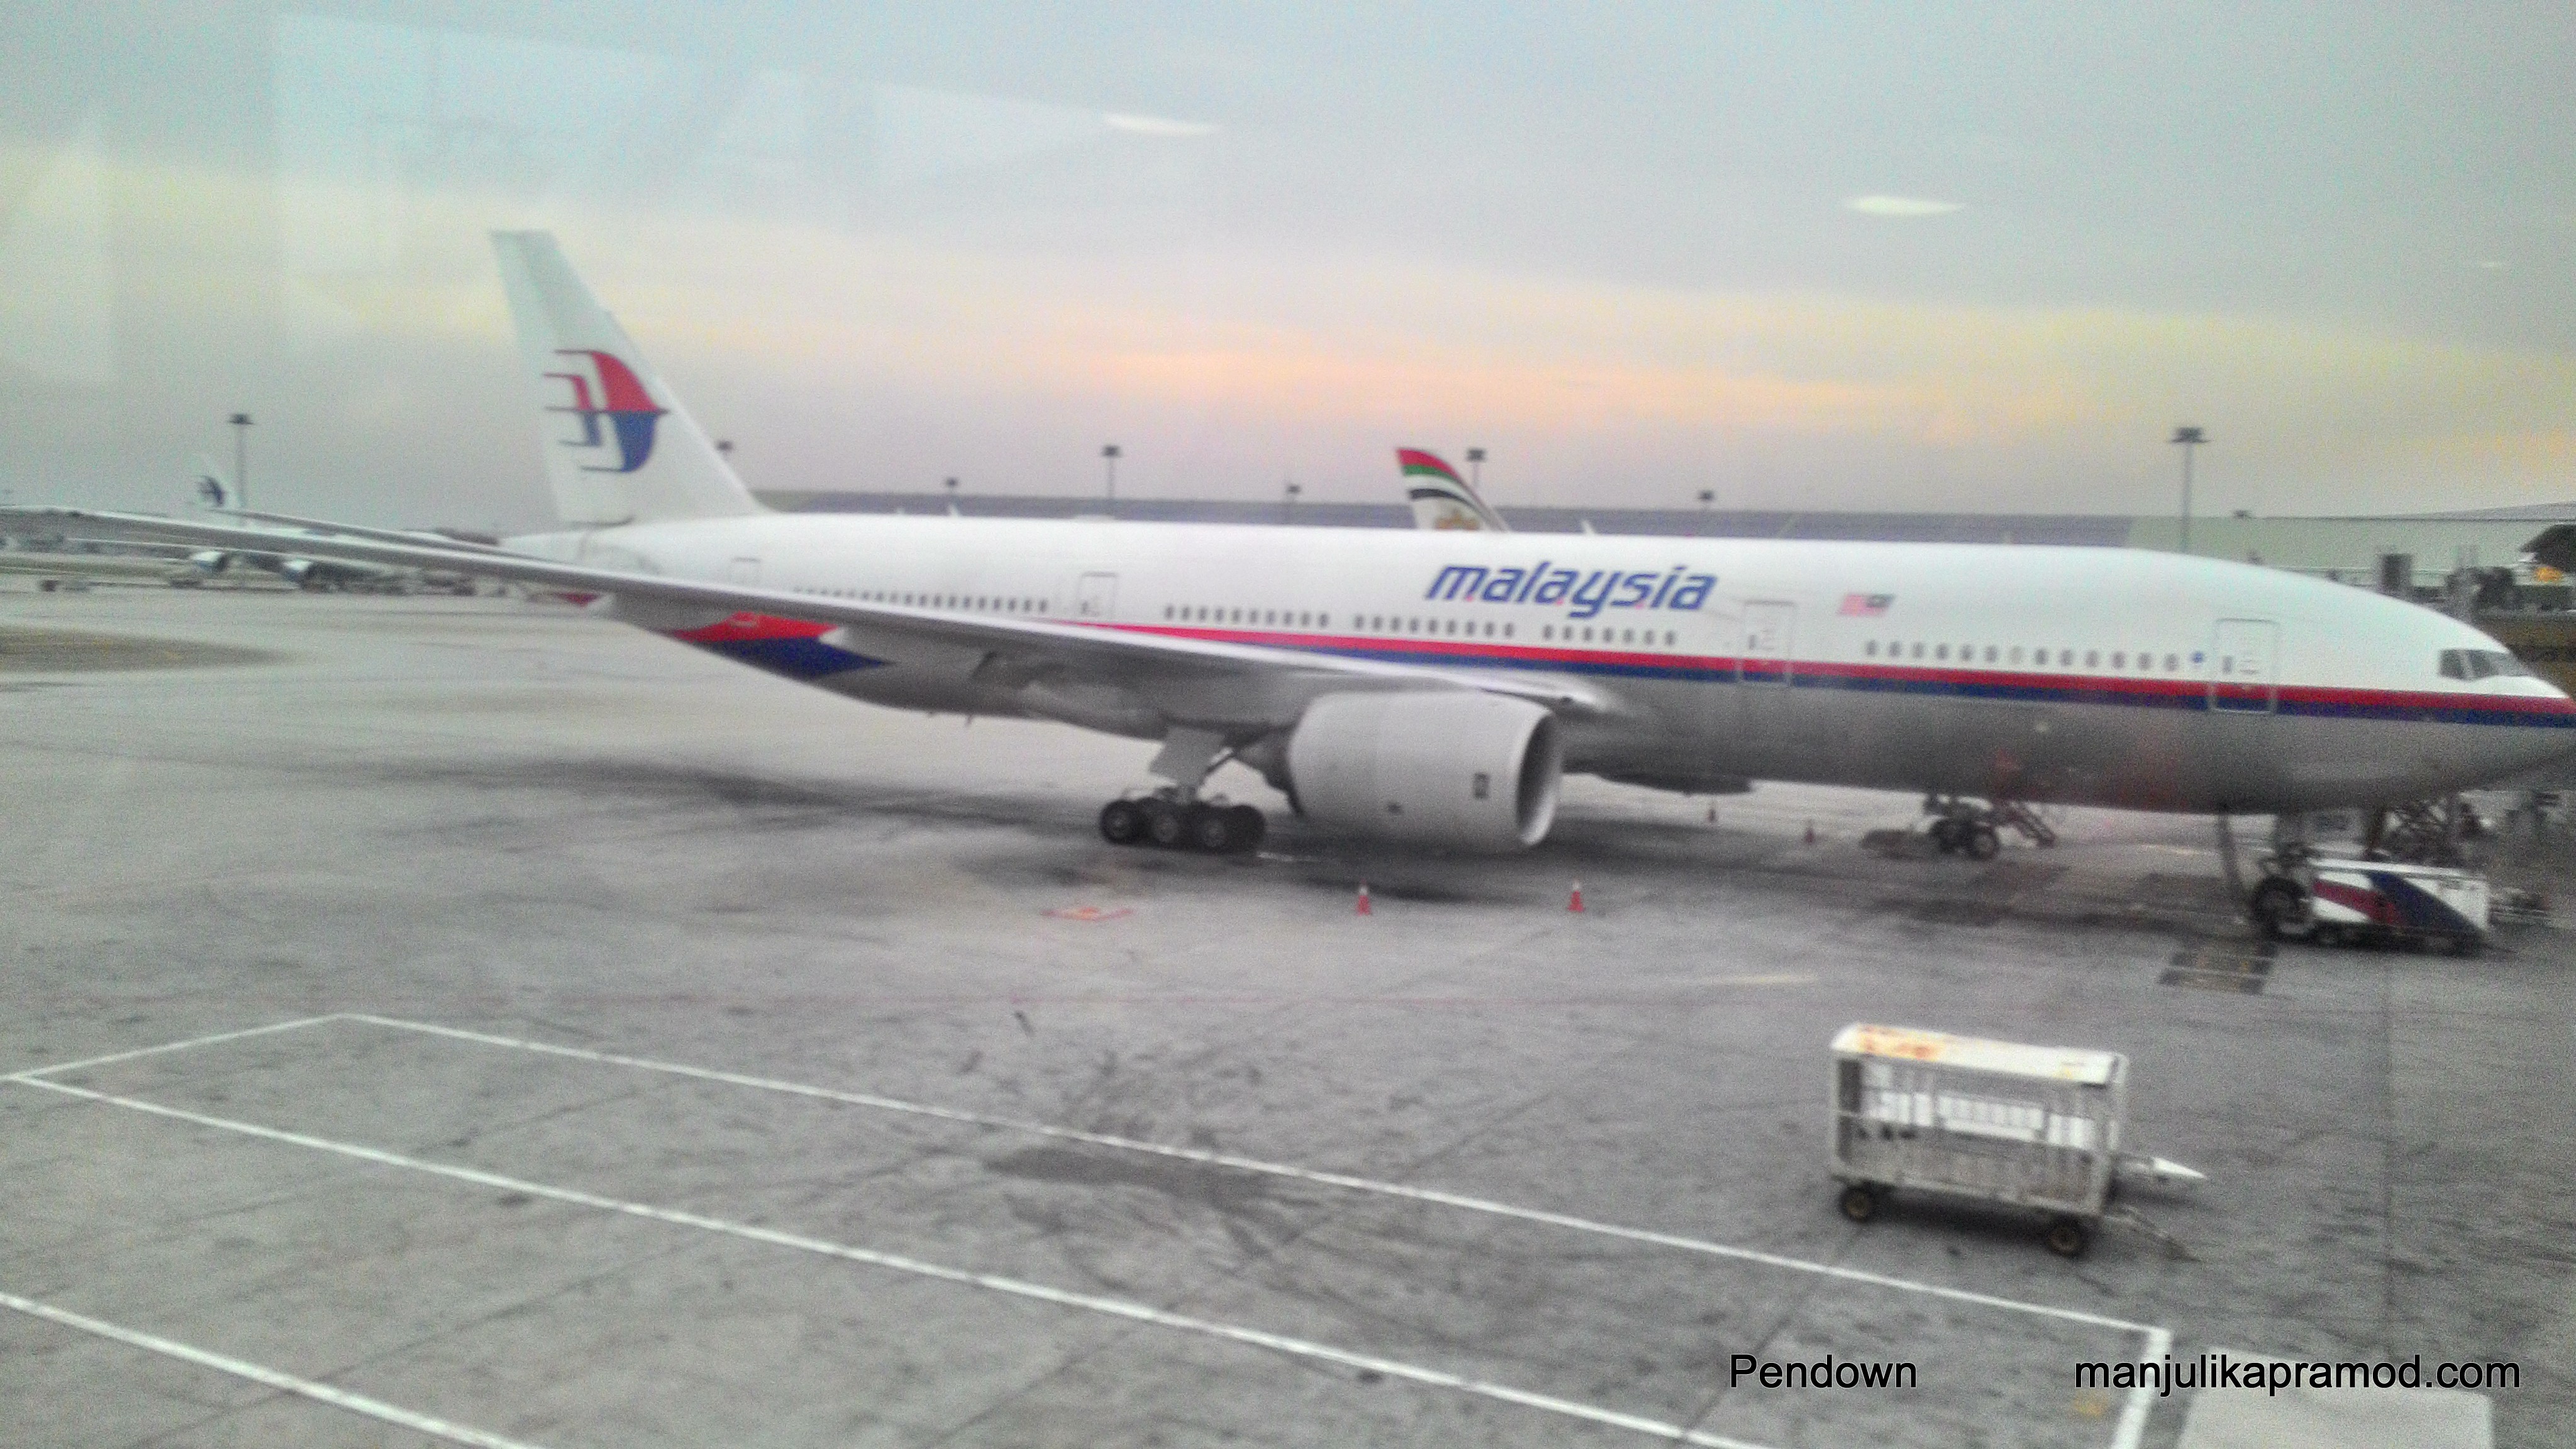 My experience of flying with Malaysian Airlines